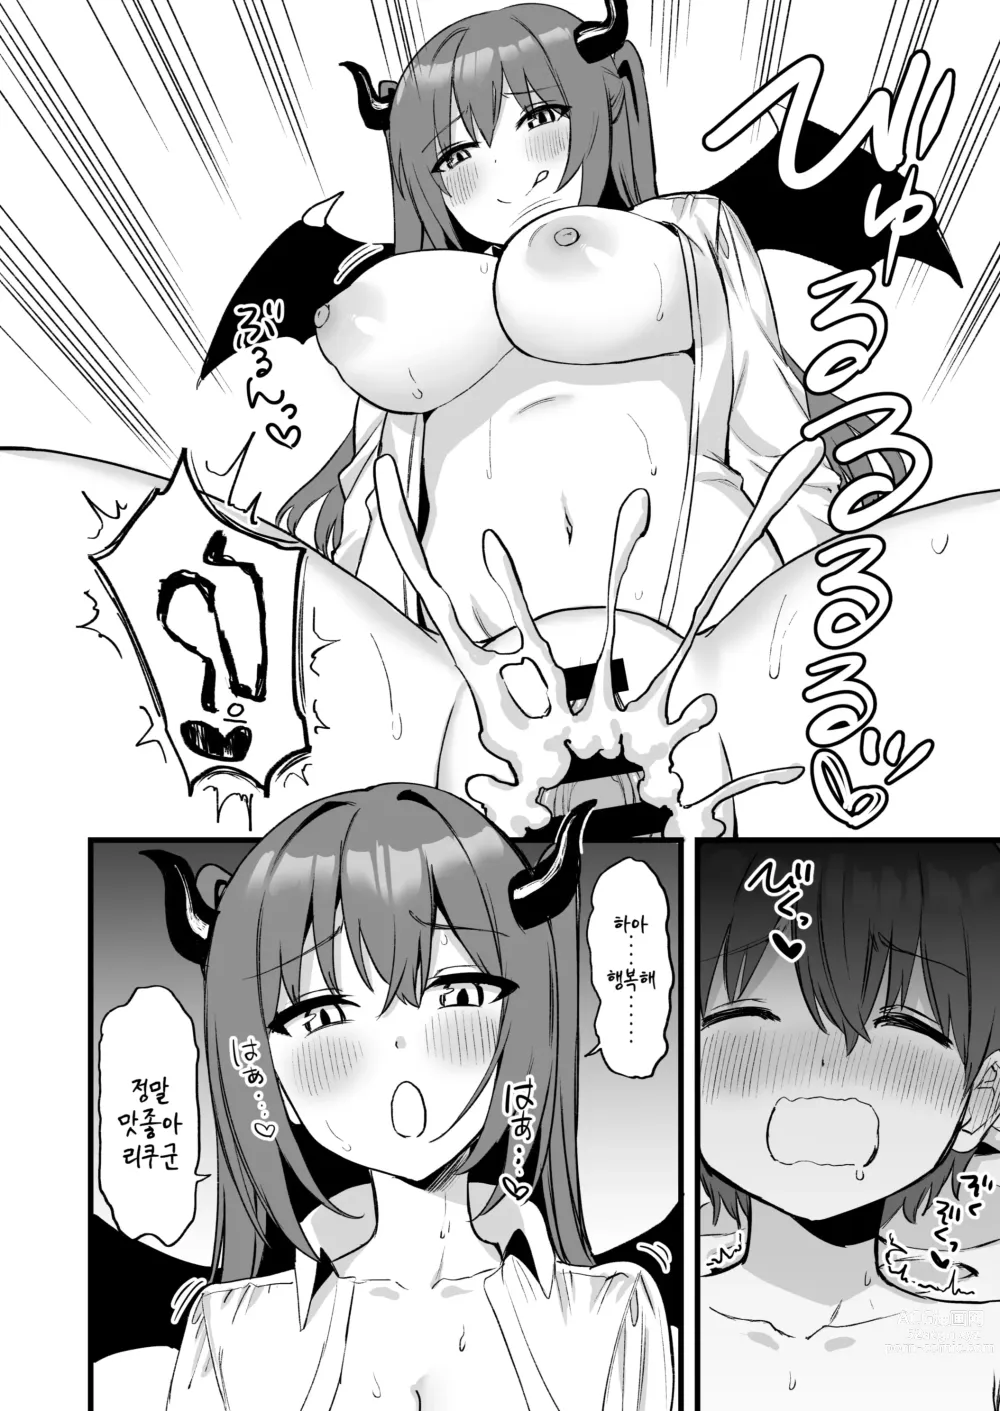 Page 54 of doujinshi 누나는 서큐버스!?